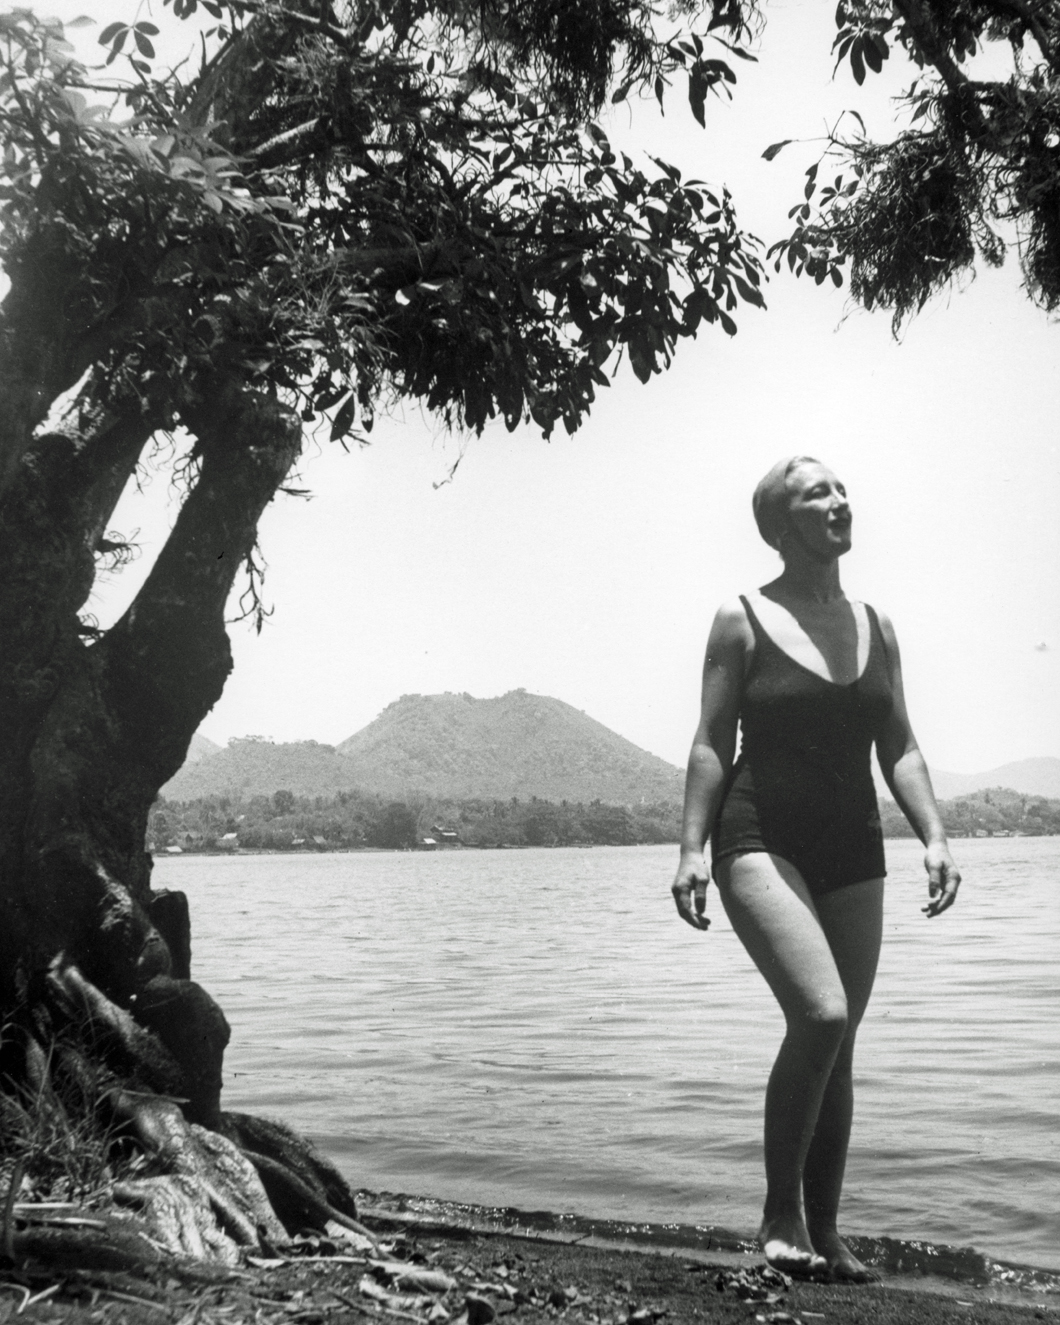 Esperanza in bathing suit standing in front of large lake